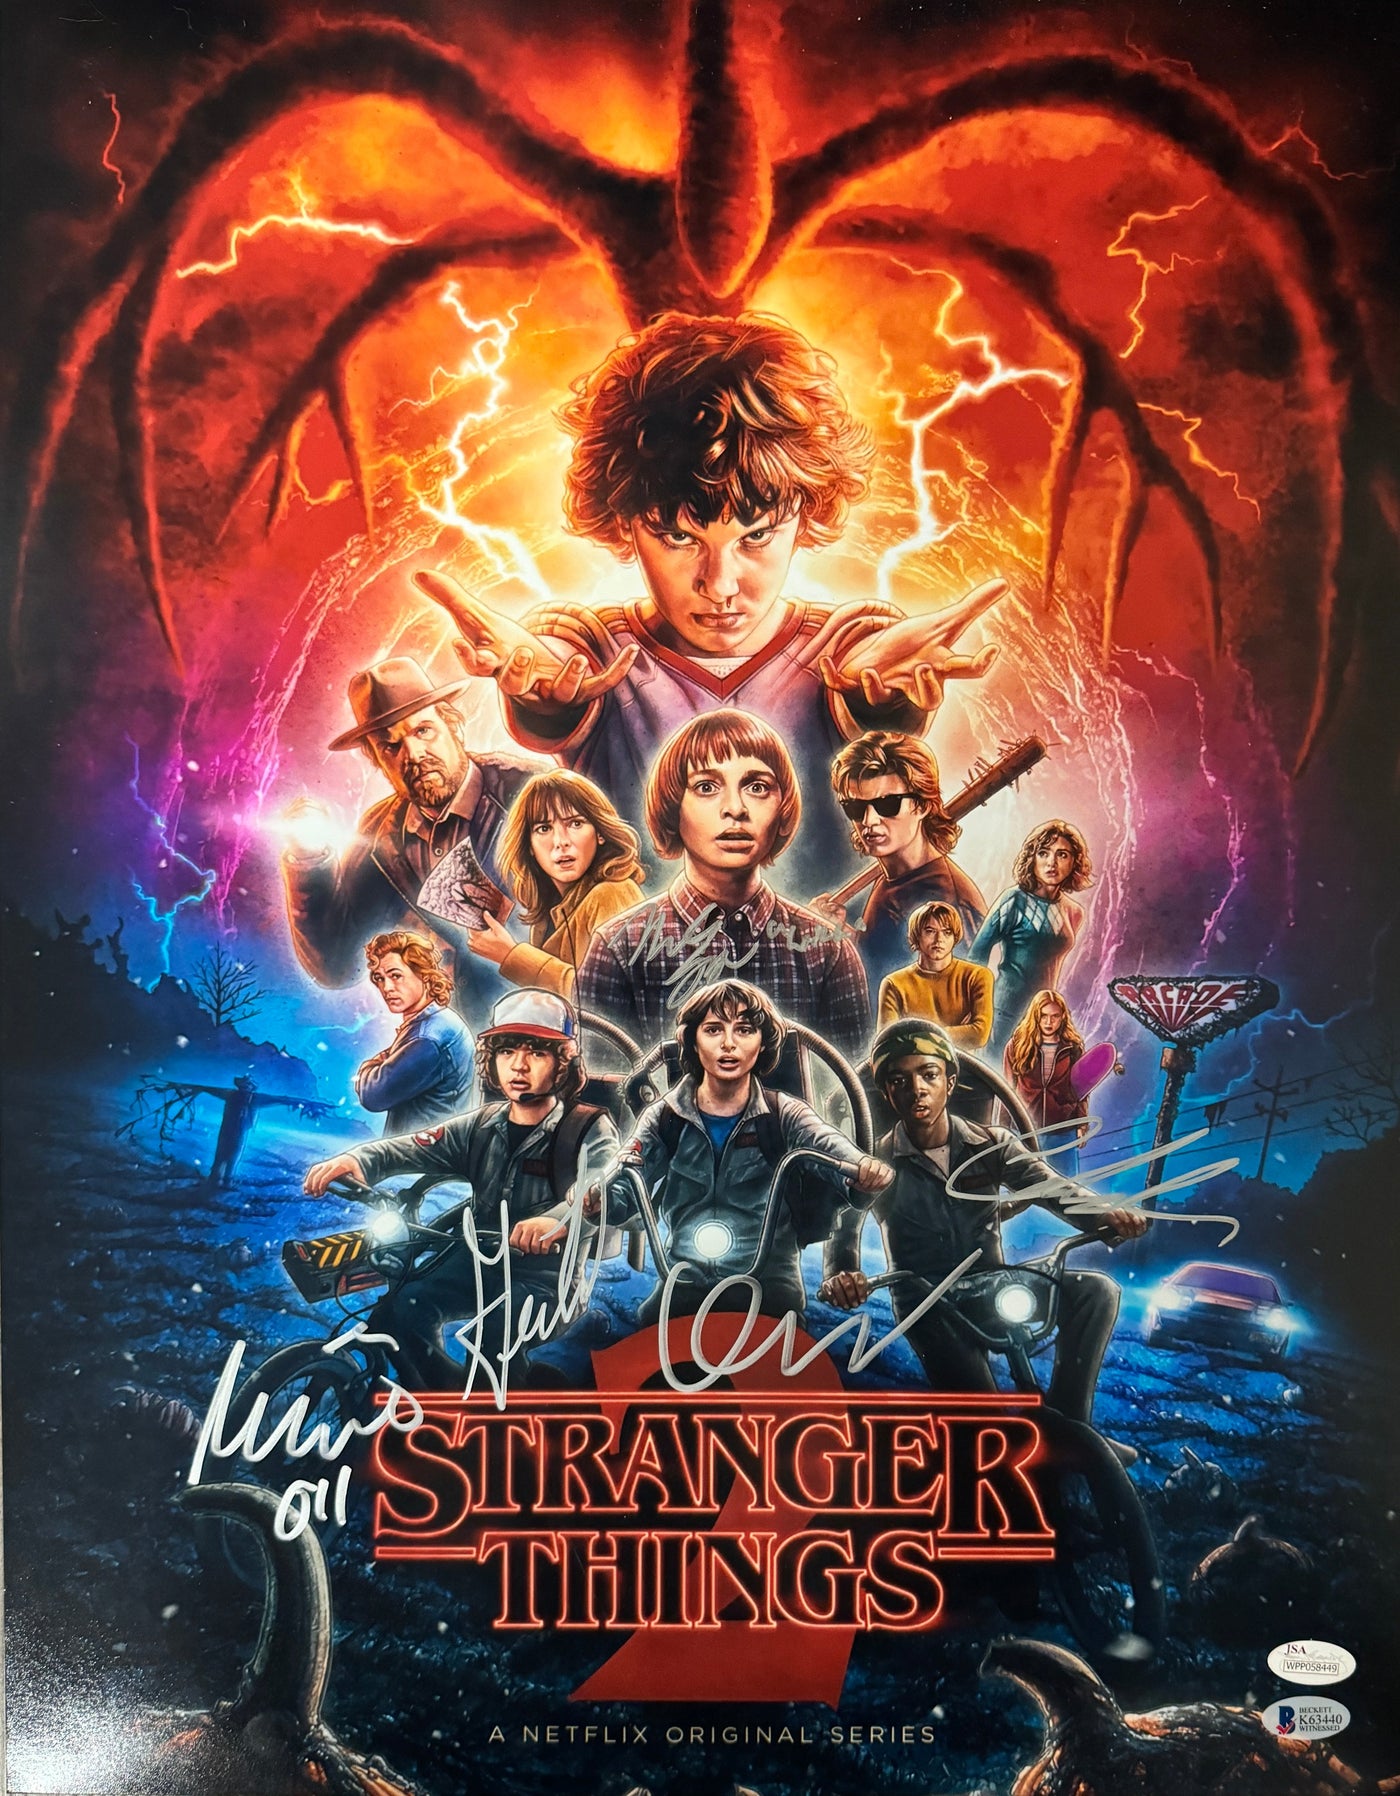 Stranger Things Cast Autographed 16x20 Photo Eleven Dustin Mike Will and Lucas JSA